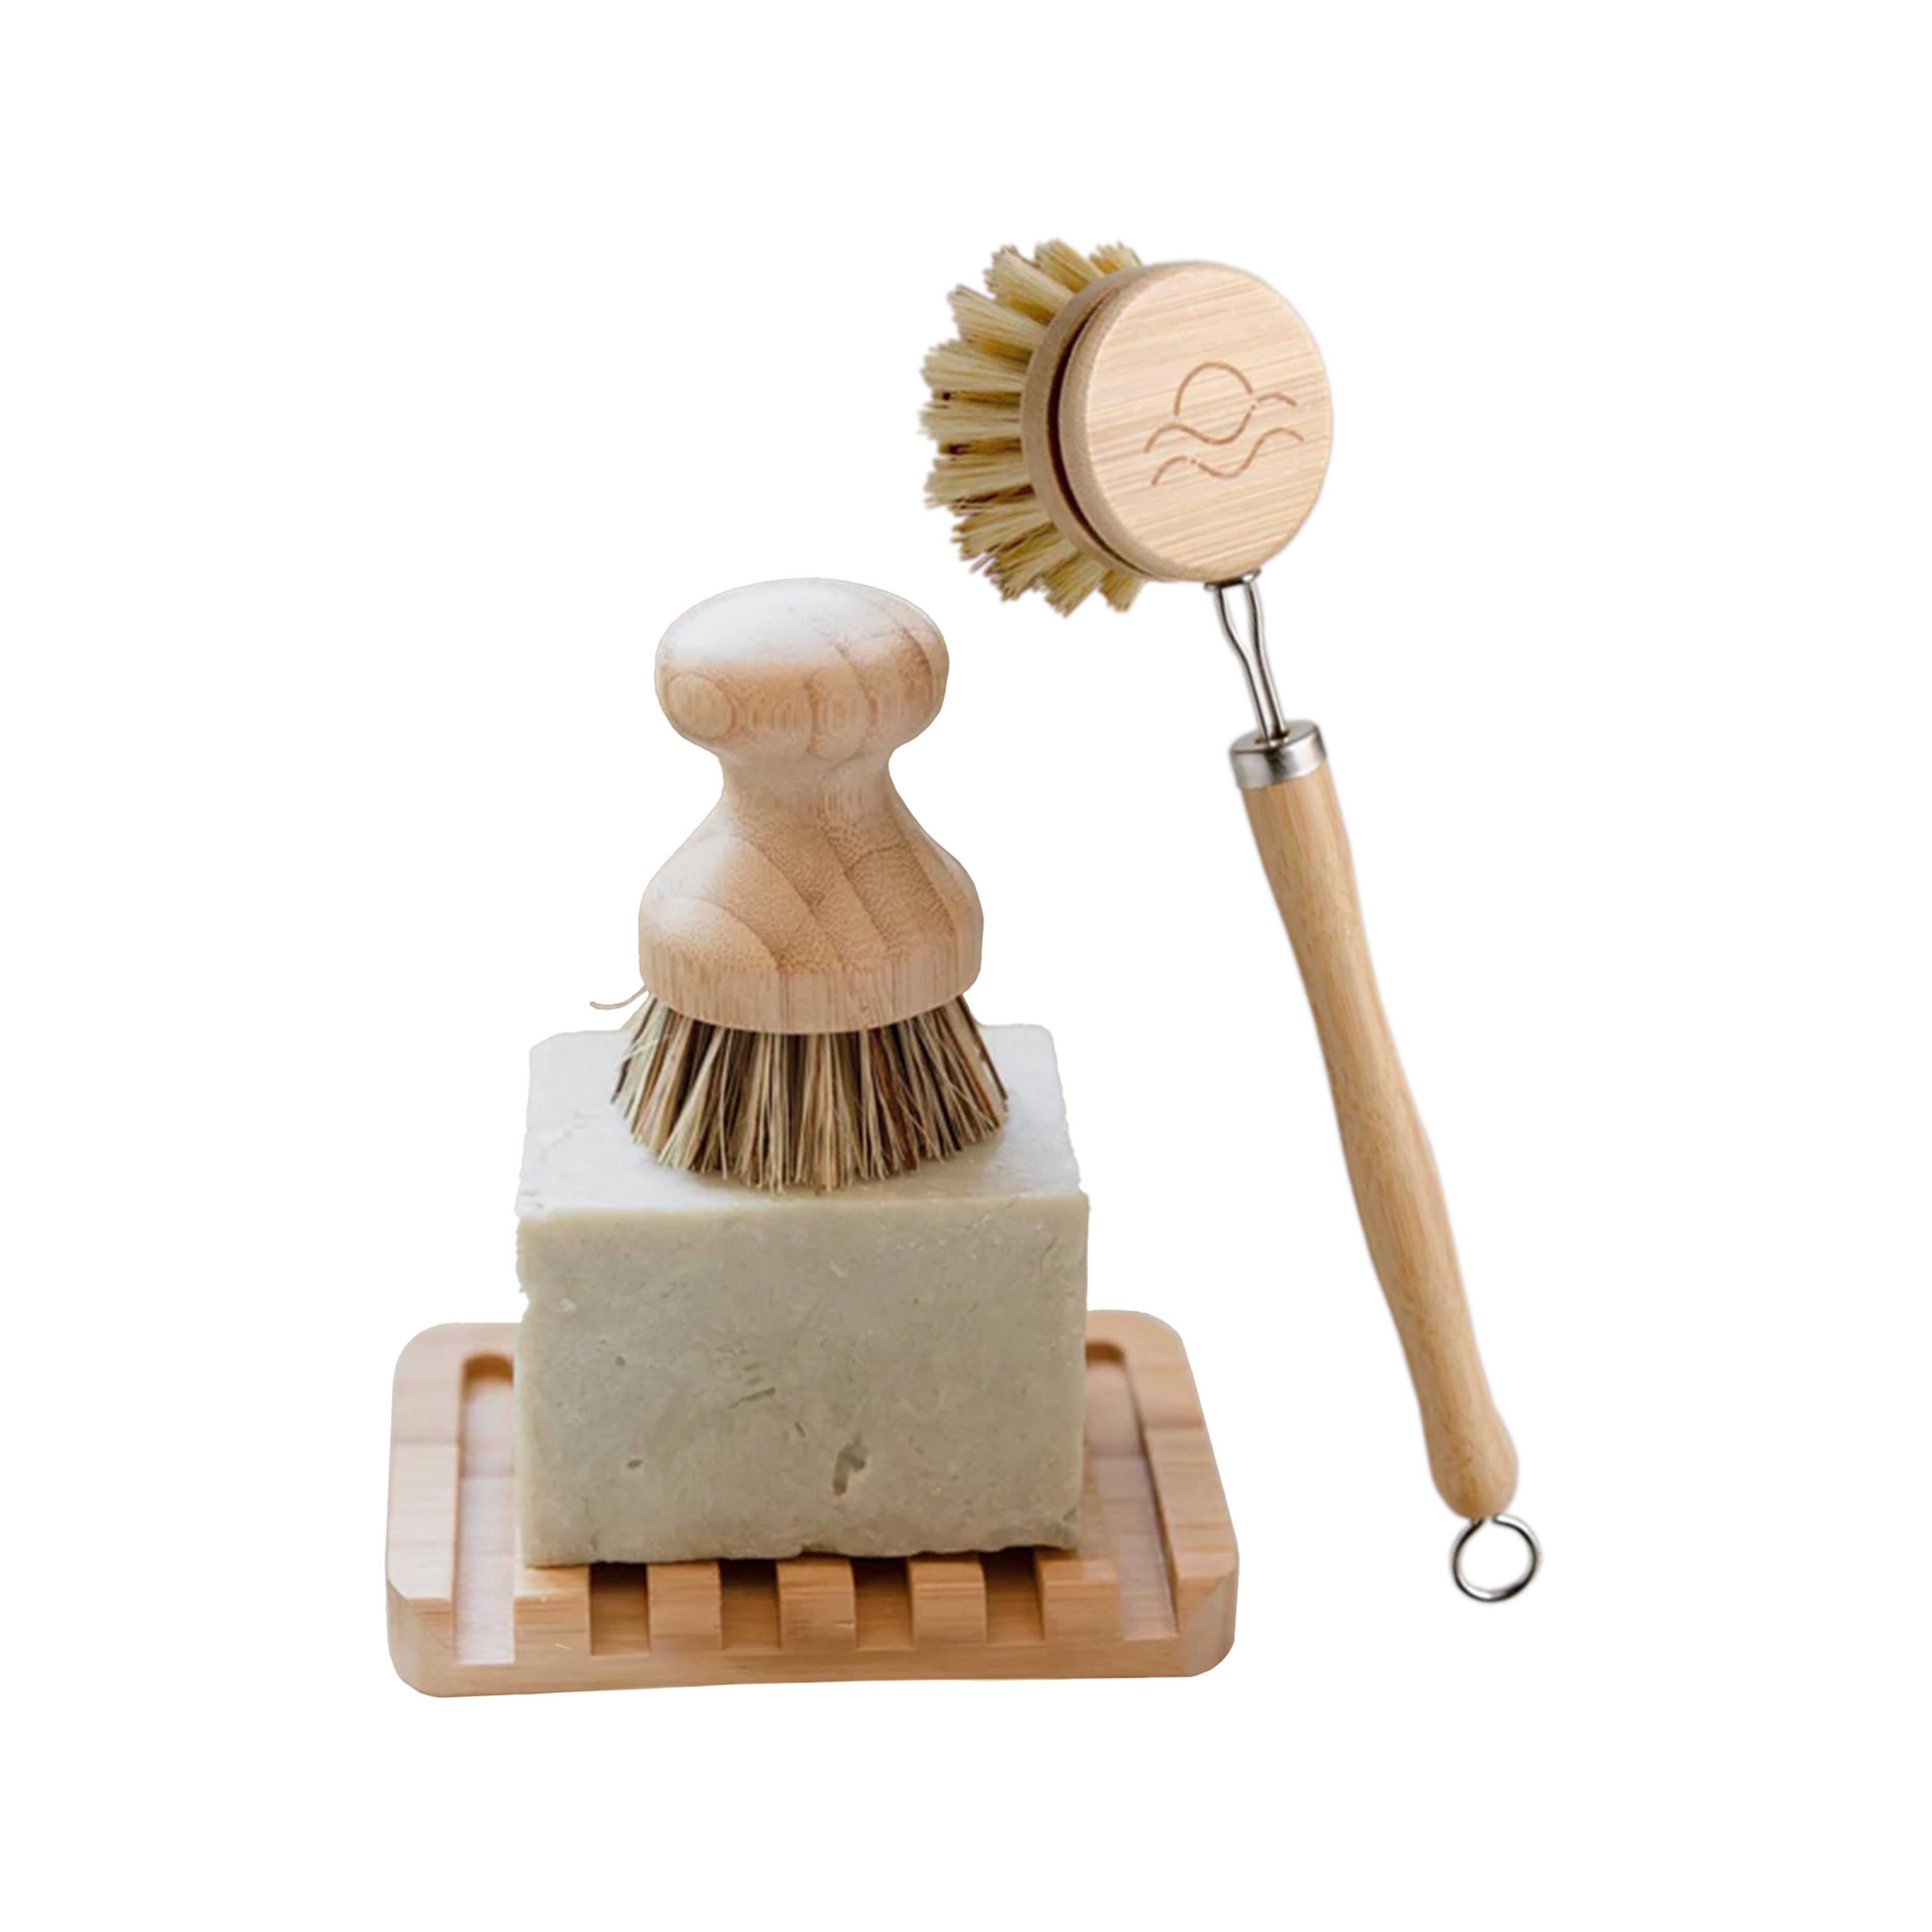 Sustainable Kitchen Bundle: Solid Dish Soap, Waterfall Soap Dish, Sisal Cleaning Brush, Pot Scrubber